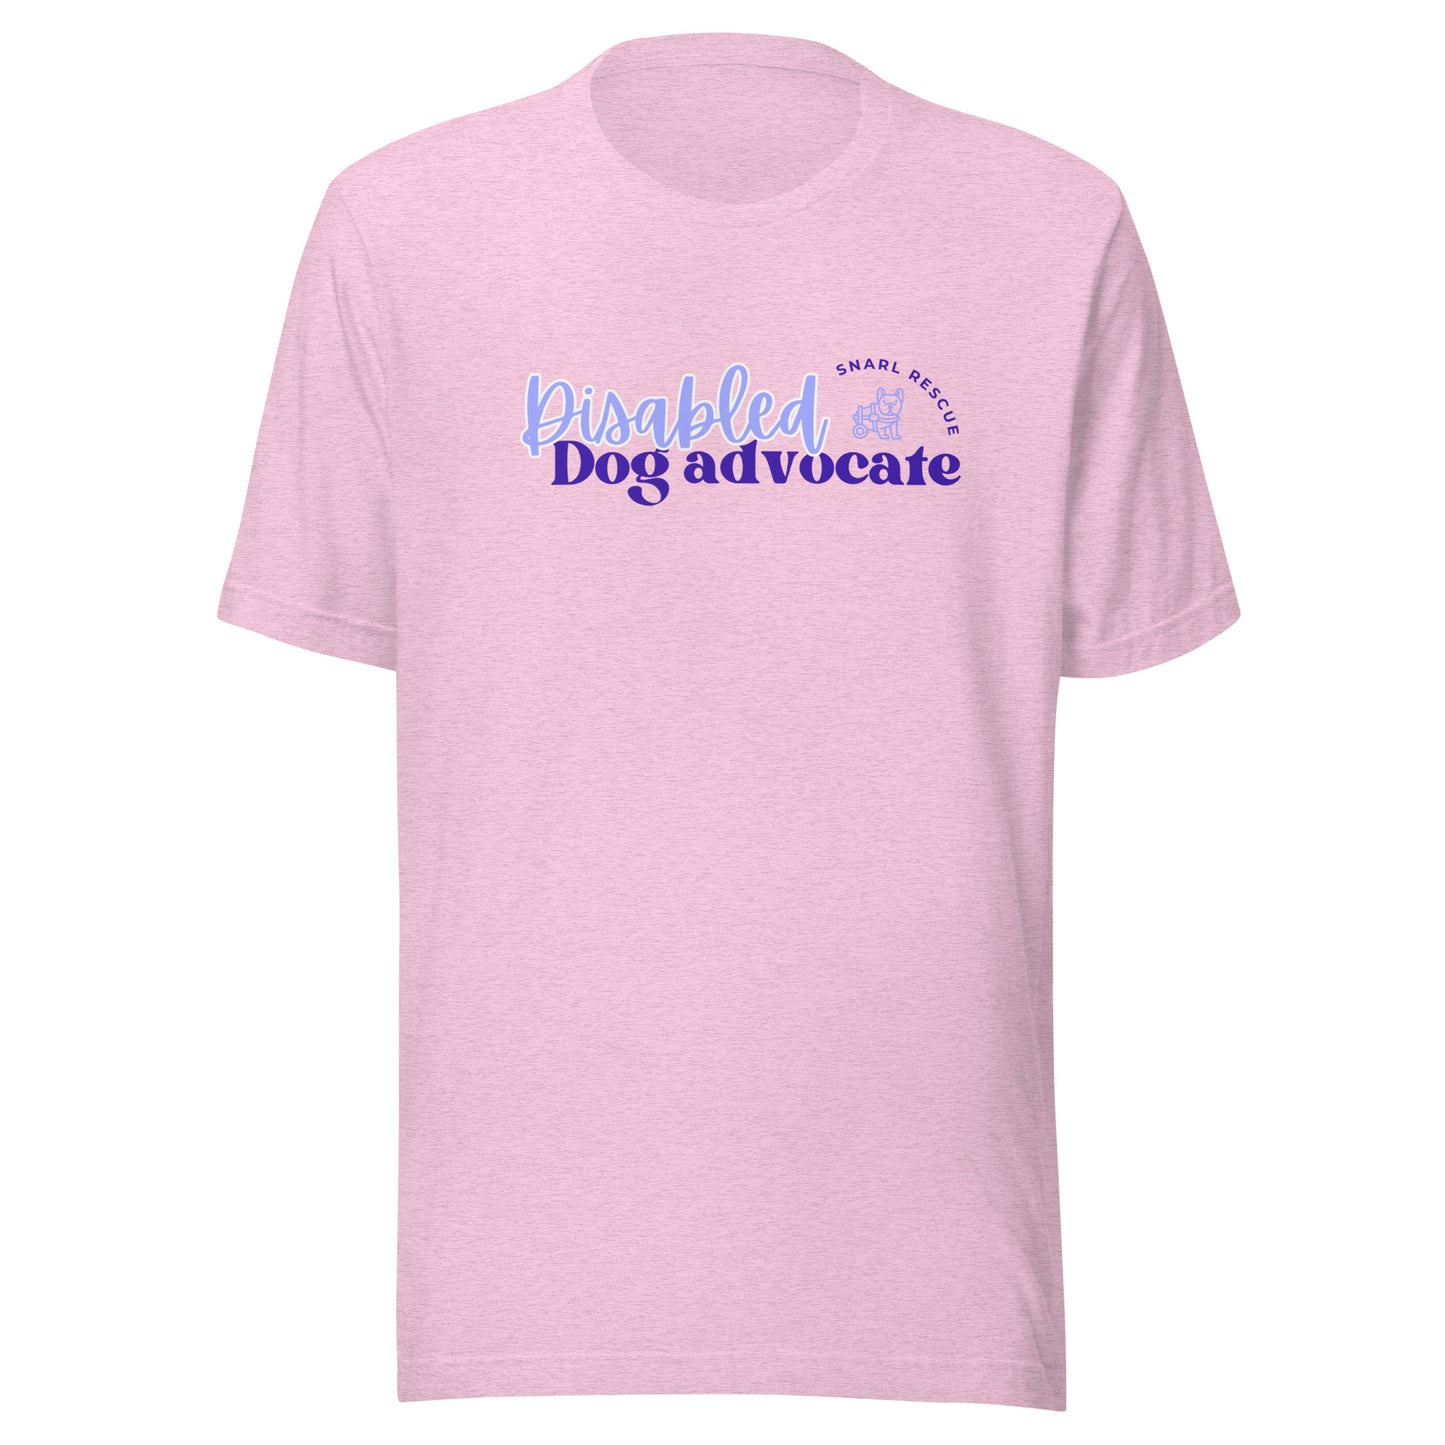 The Disabled Dog Advocate Tshirt